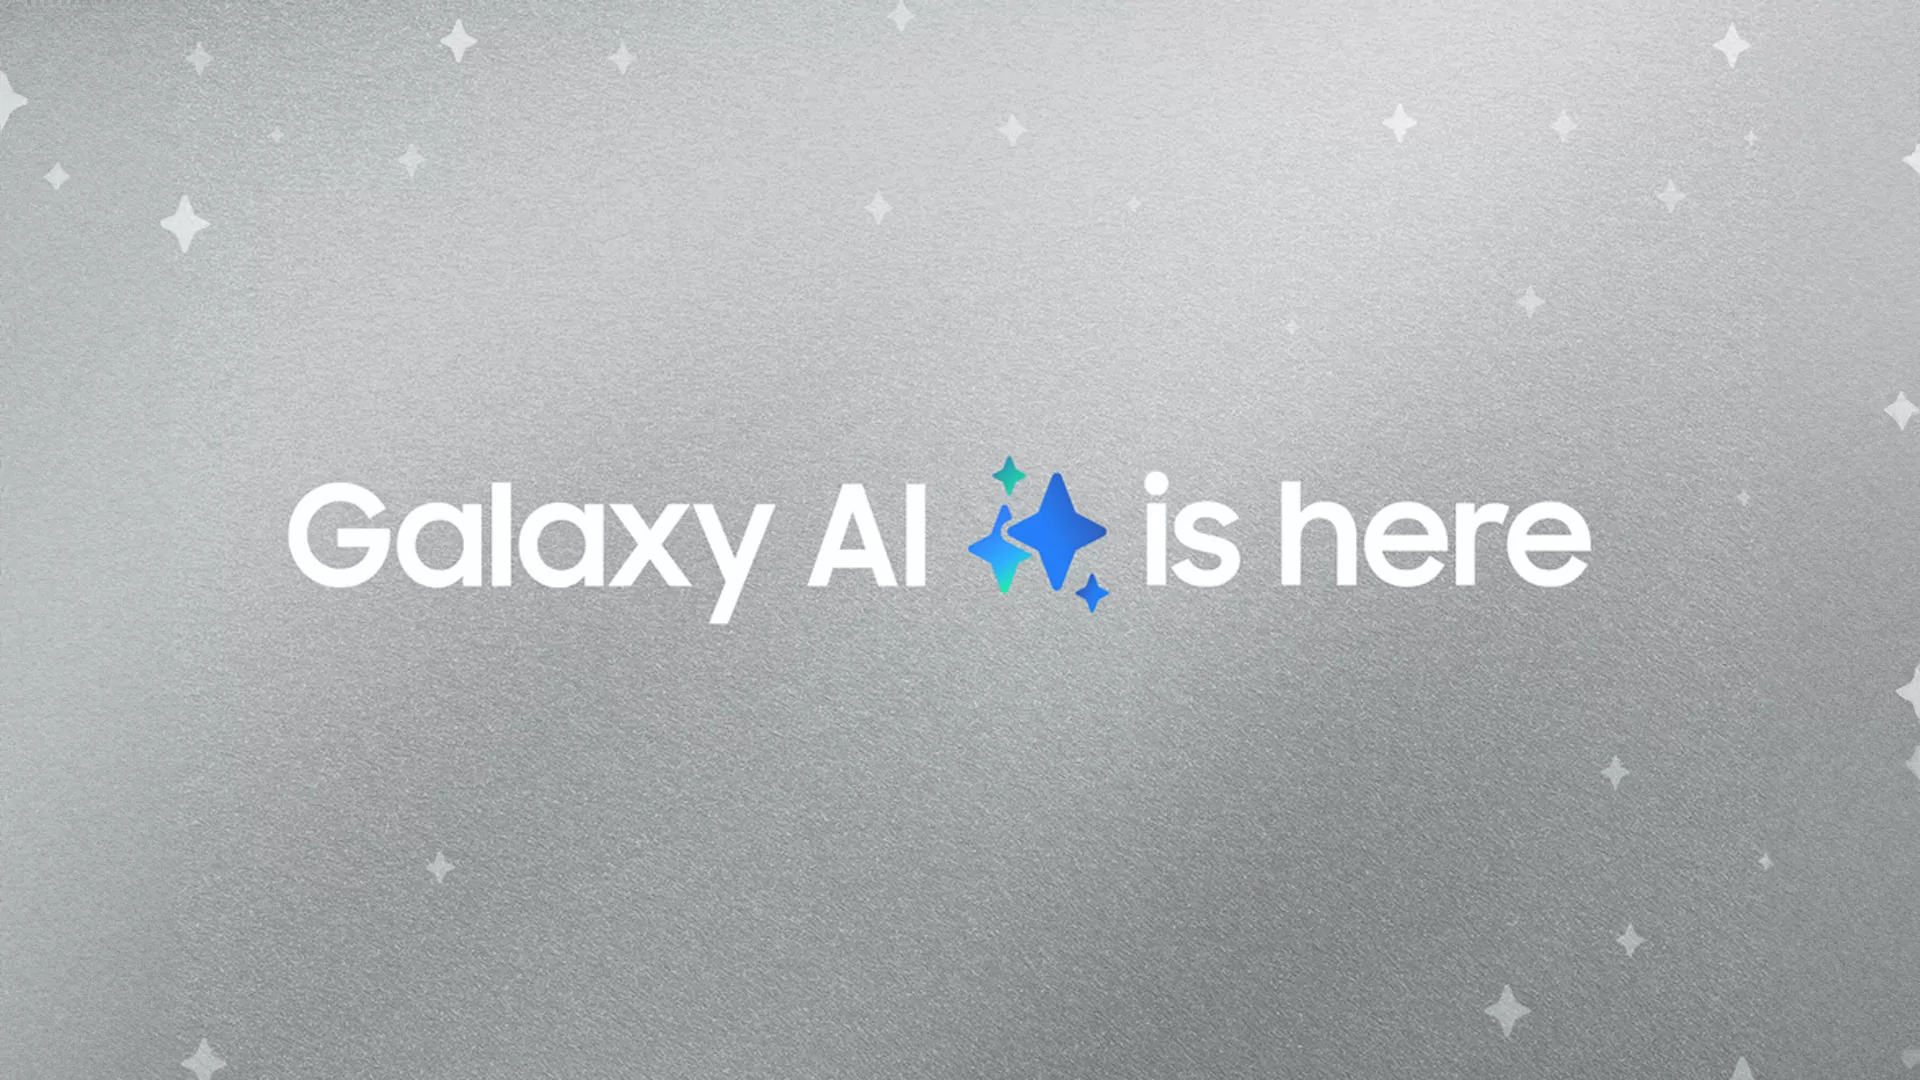 Samsung Expands Galaxy AI to Older Devices